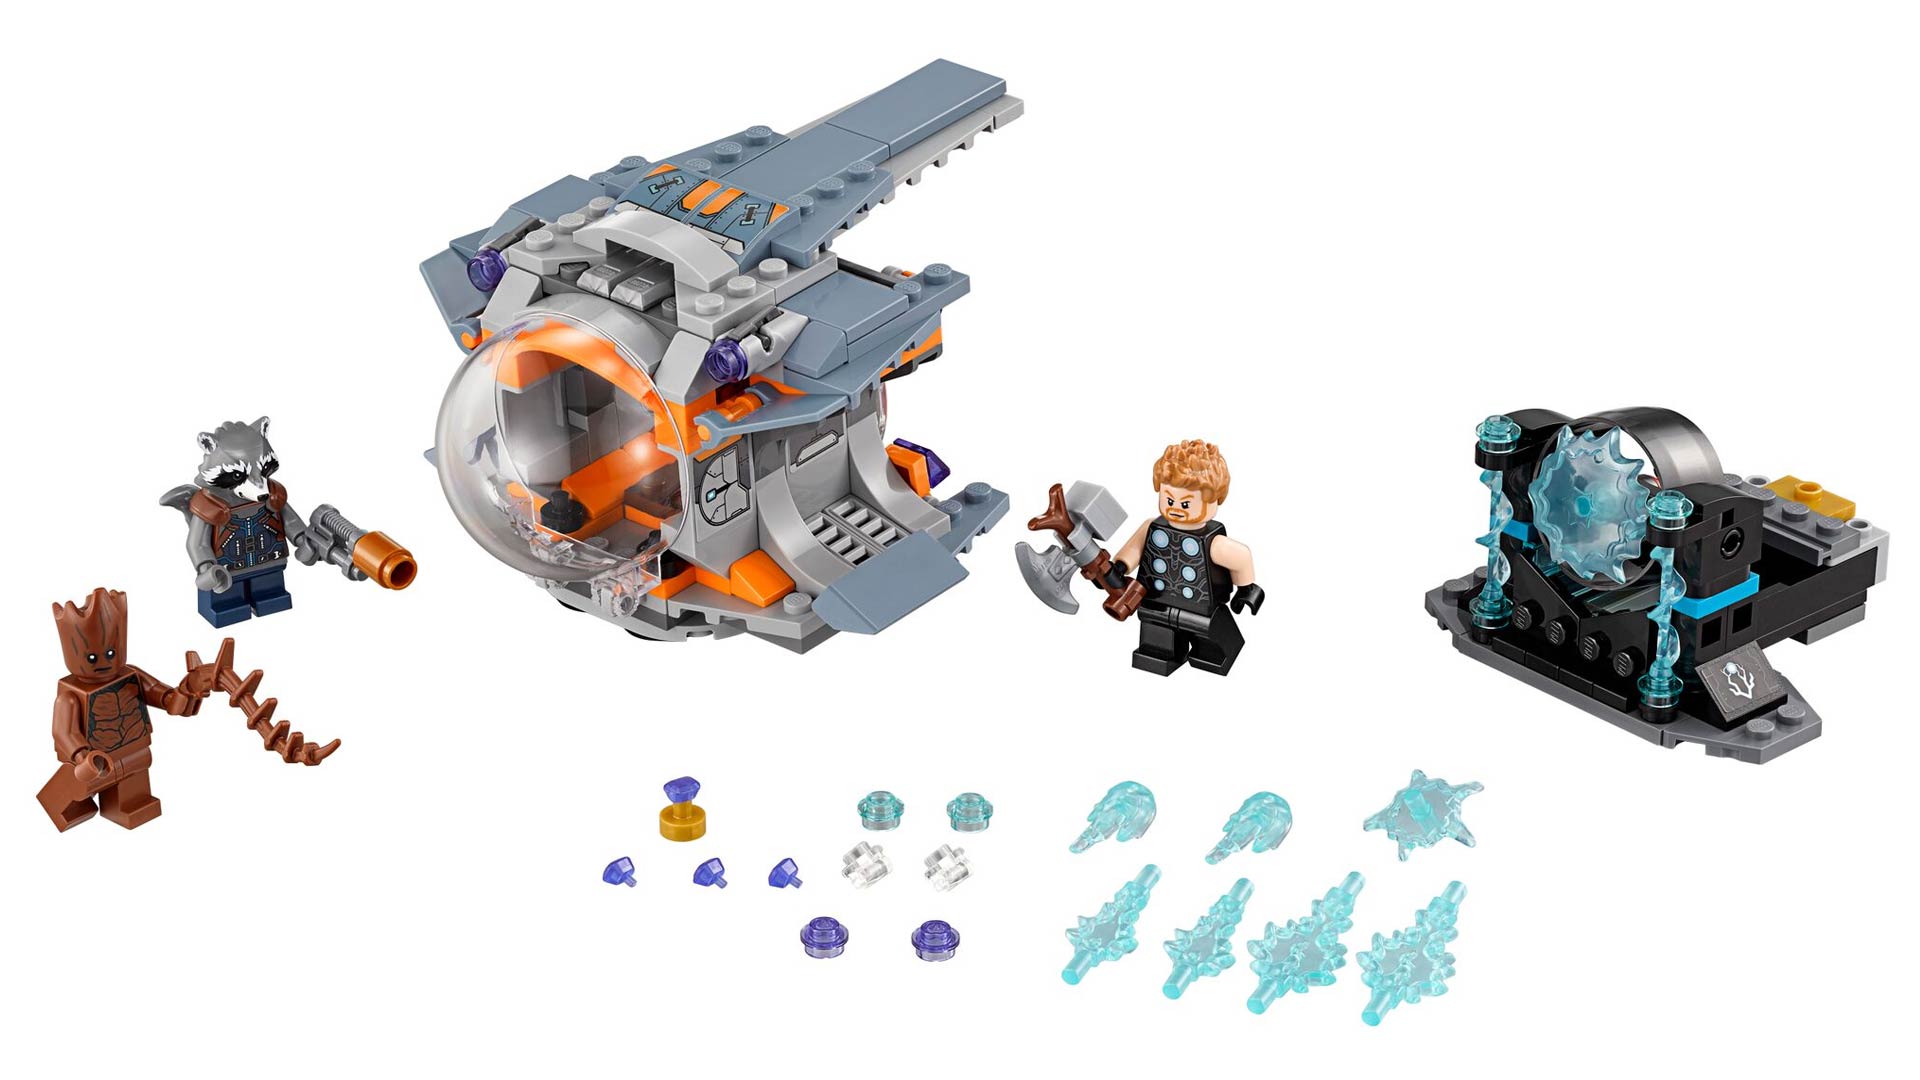 LEGO Marvel 76102 Thor's Weapon Quest Set from Super Heroes Avengers Infinity War